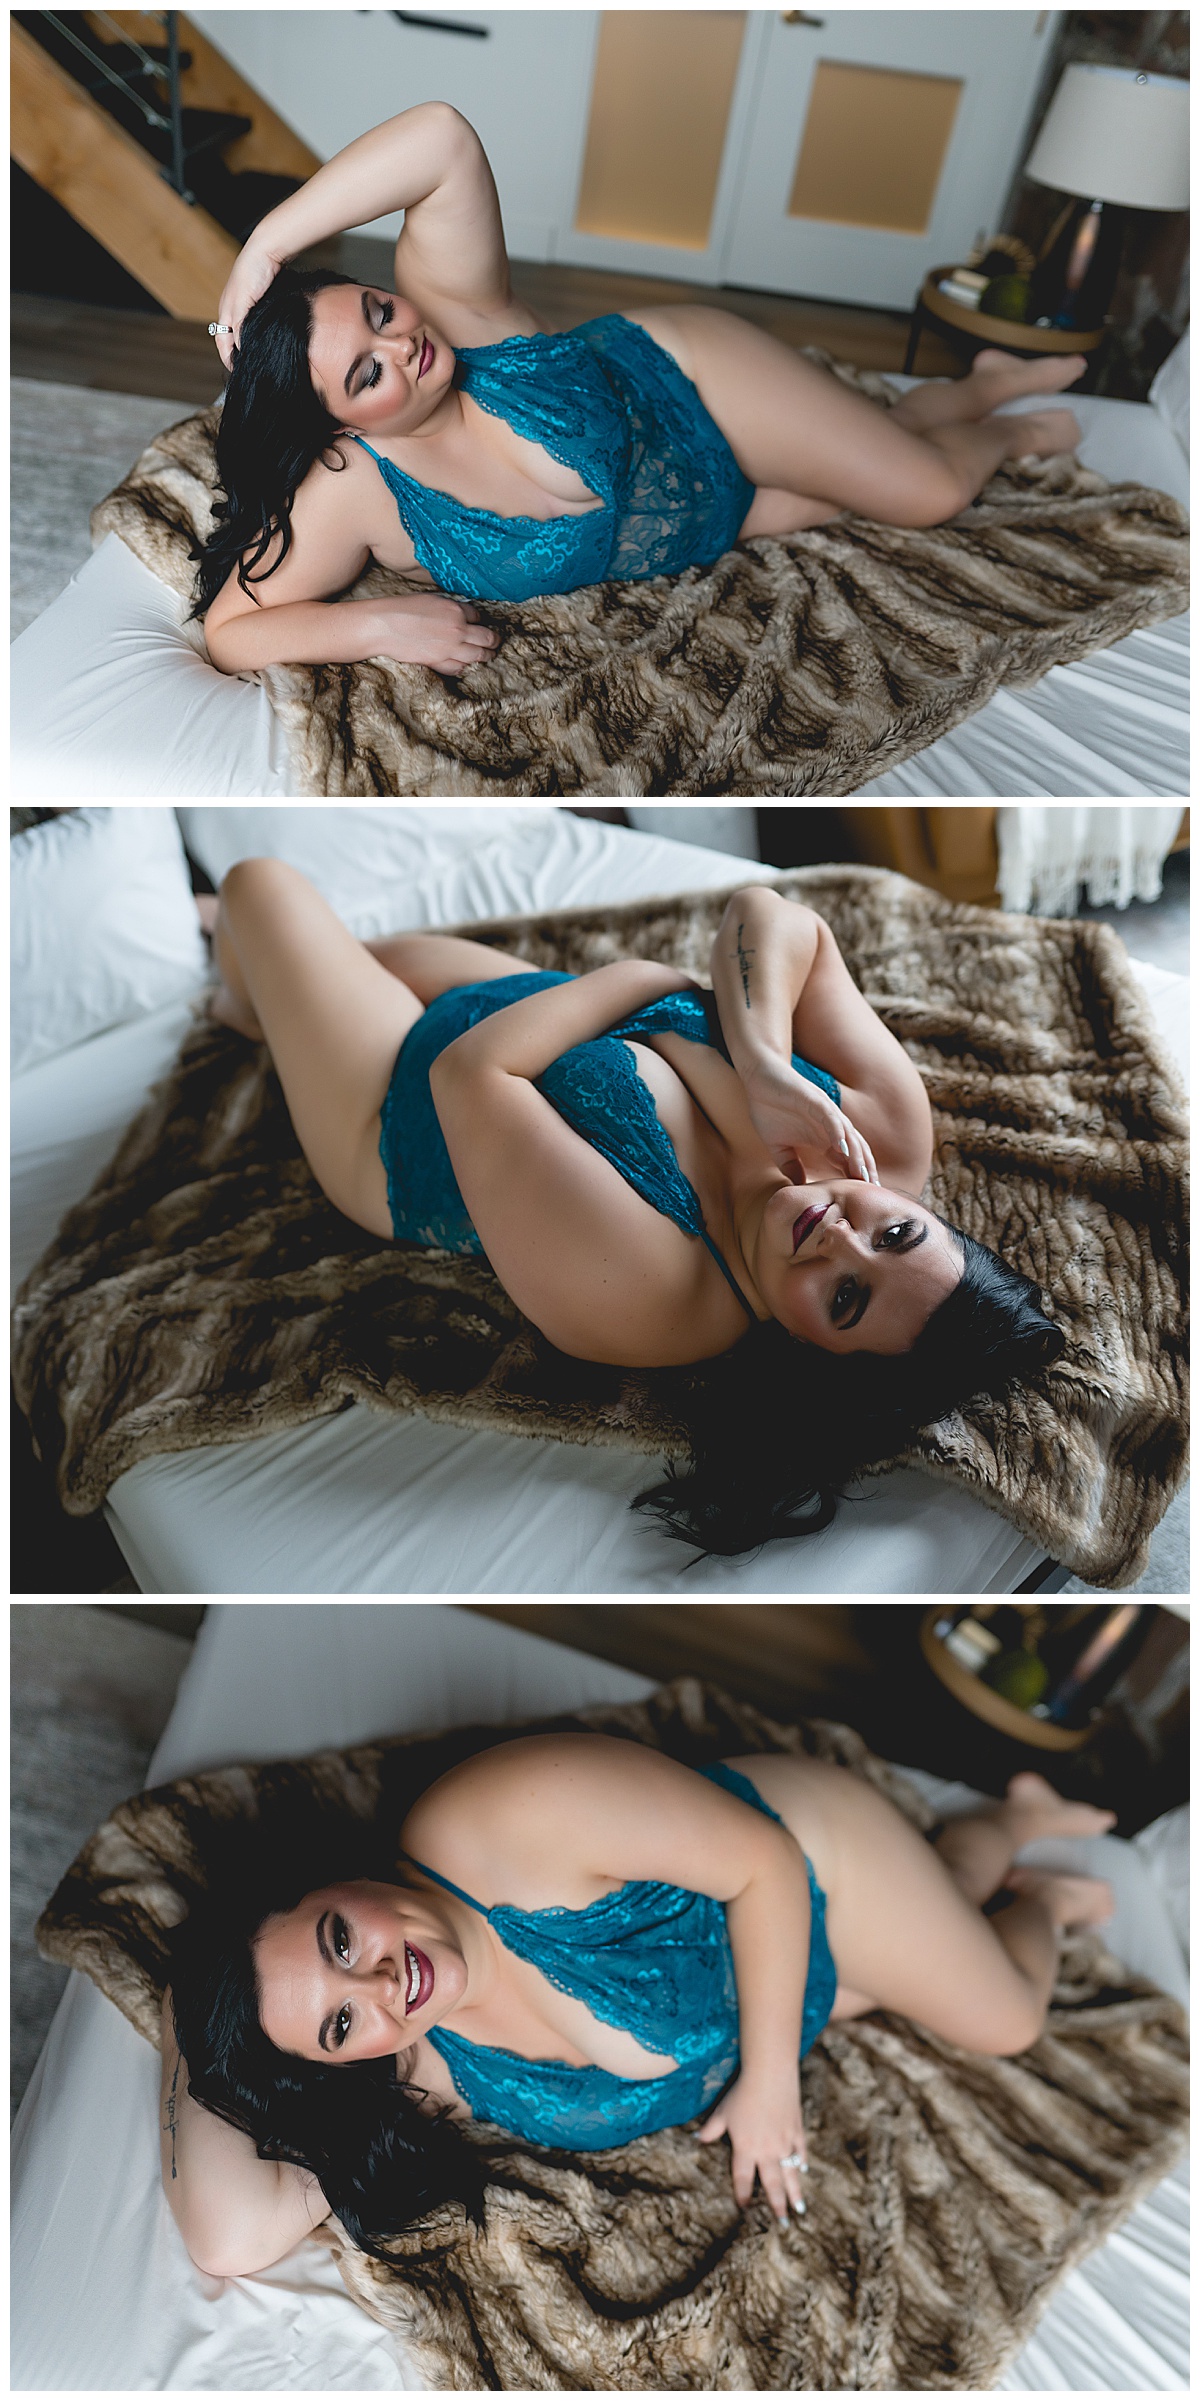 Lady lays on bed with fur blanket in jewel toned lingerie